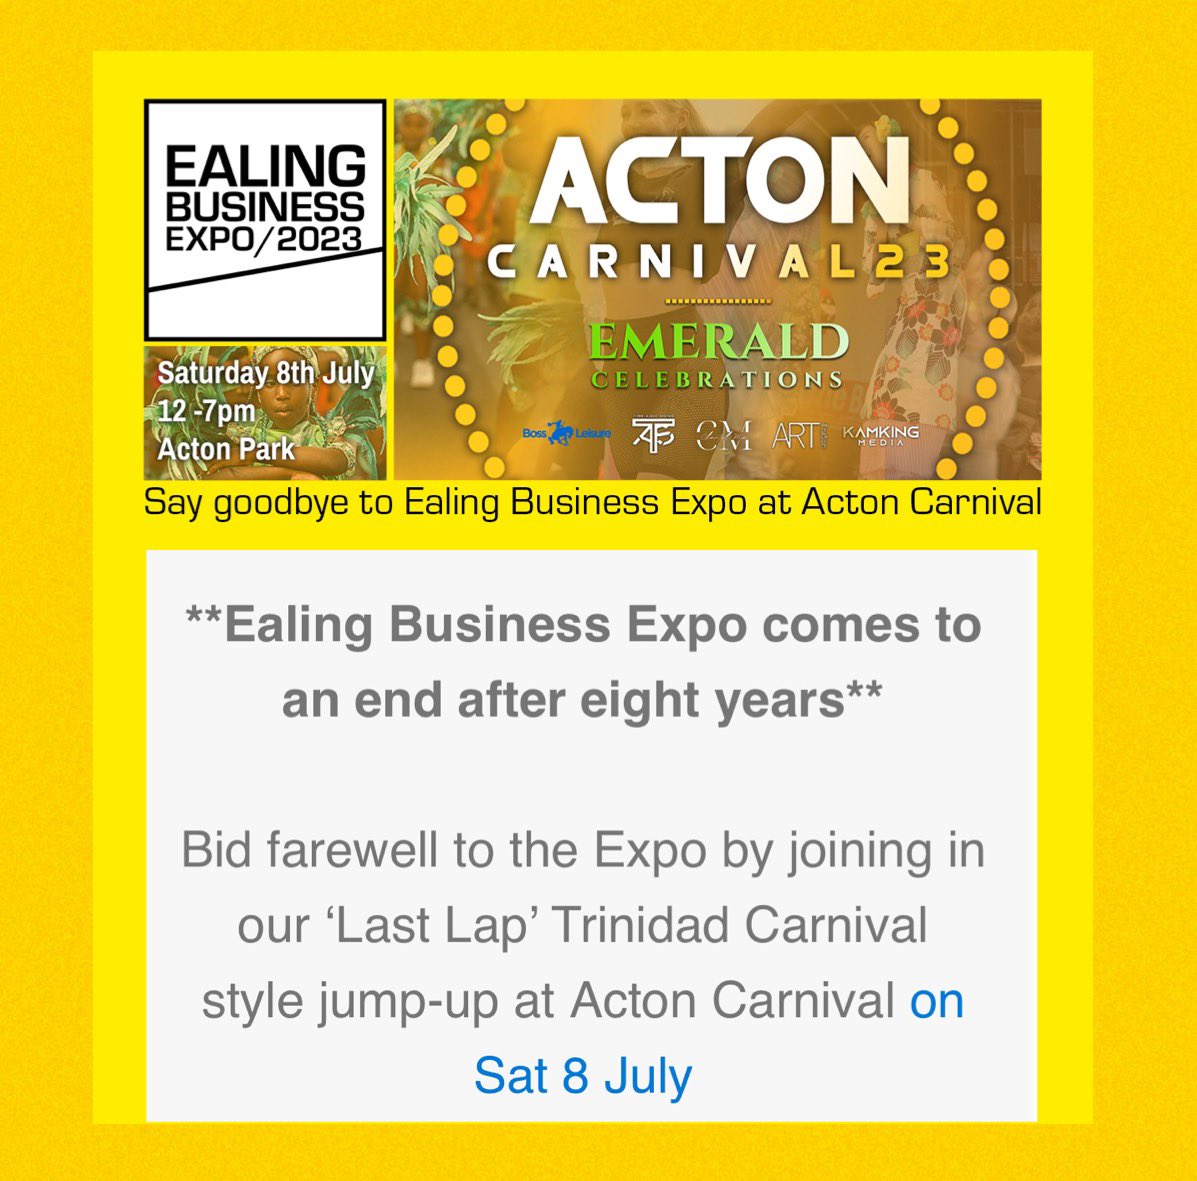 Come jump-up with us at Acton Carnival as we close off eight years of the Ealing Business Expo All the details in our latest email newsletter: mailchi.mp/contactusealin… #Trinidadstylejumpup #ActonCarnival #Expo2023 #EalingBizExpo #saygoodbye